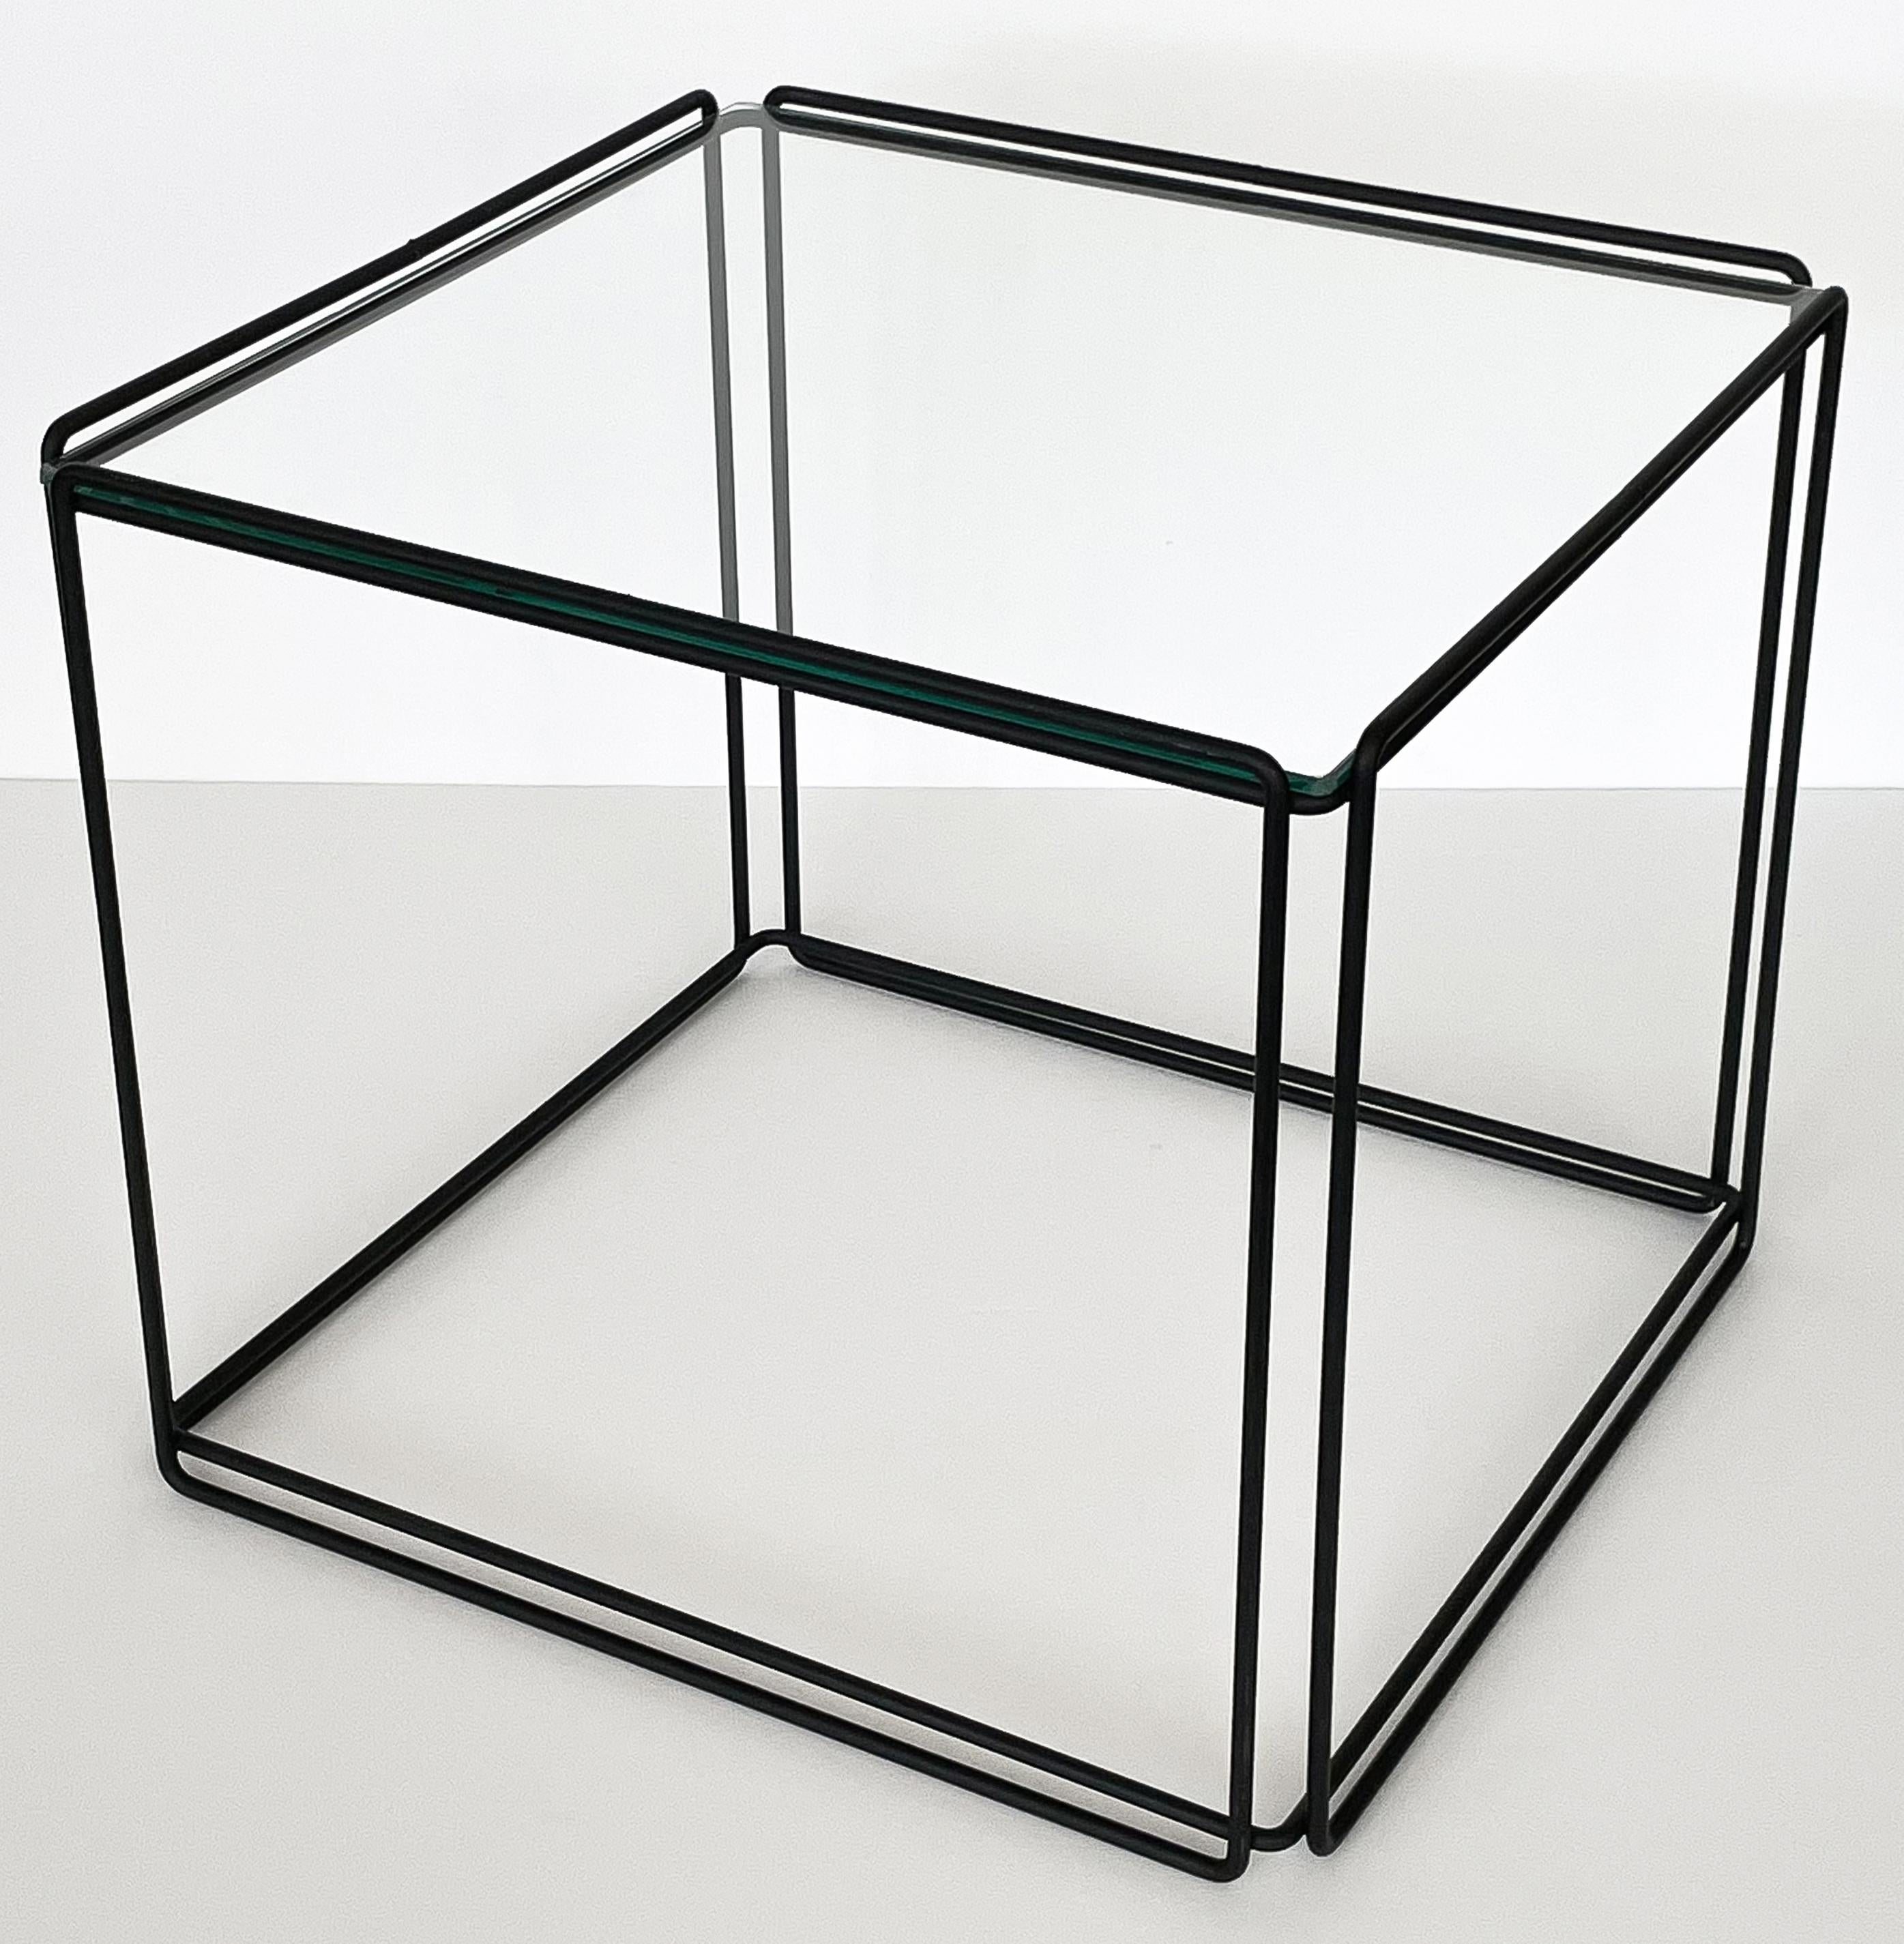 A minimalist metal and glass Isosceles cube side table by Max Sauze for Attrow, France, circa 1970s. Black painted welded wrought iron metal frame with inset 1/4